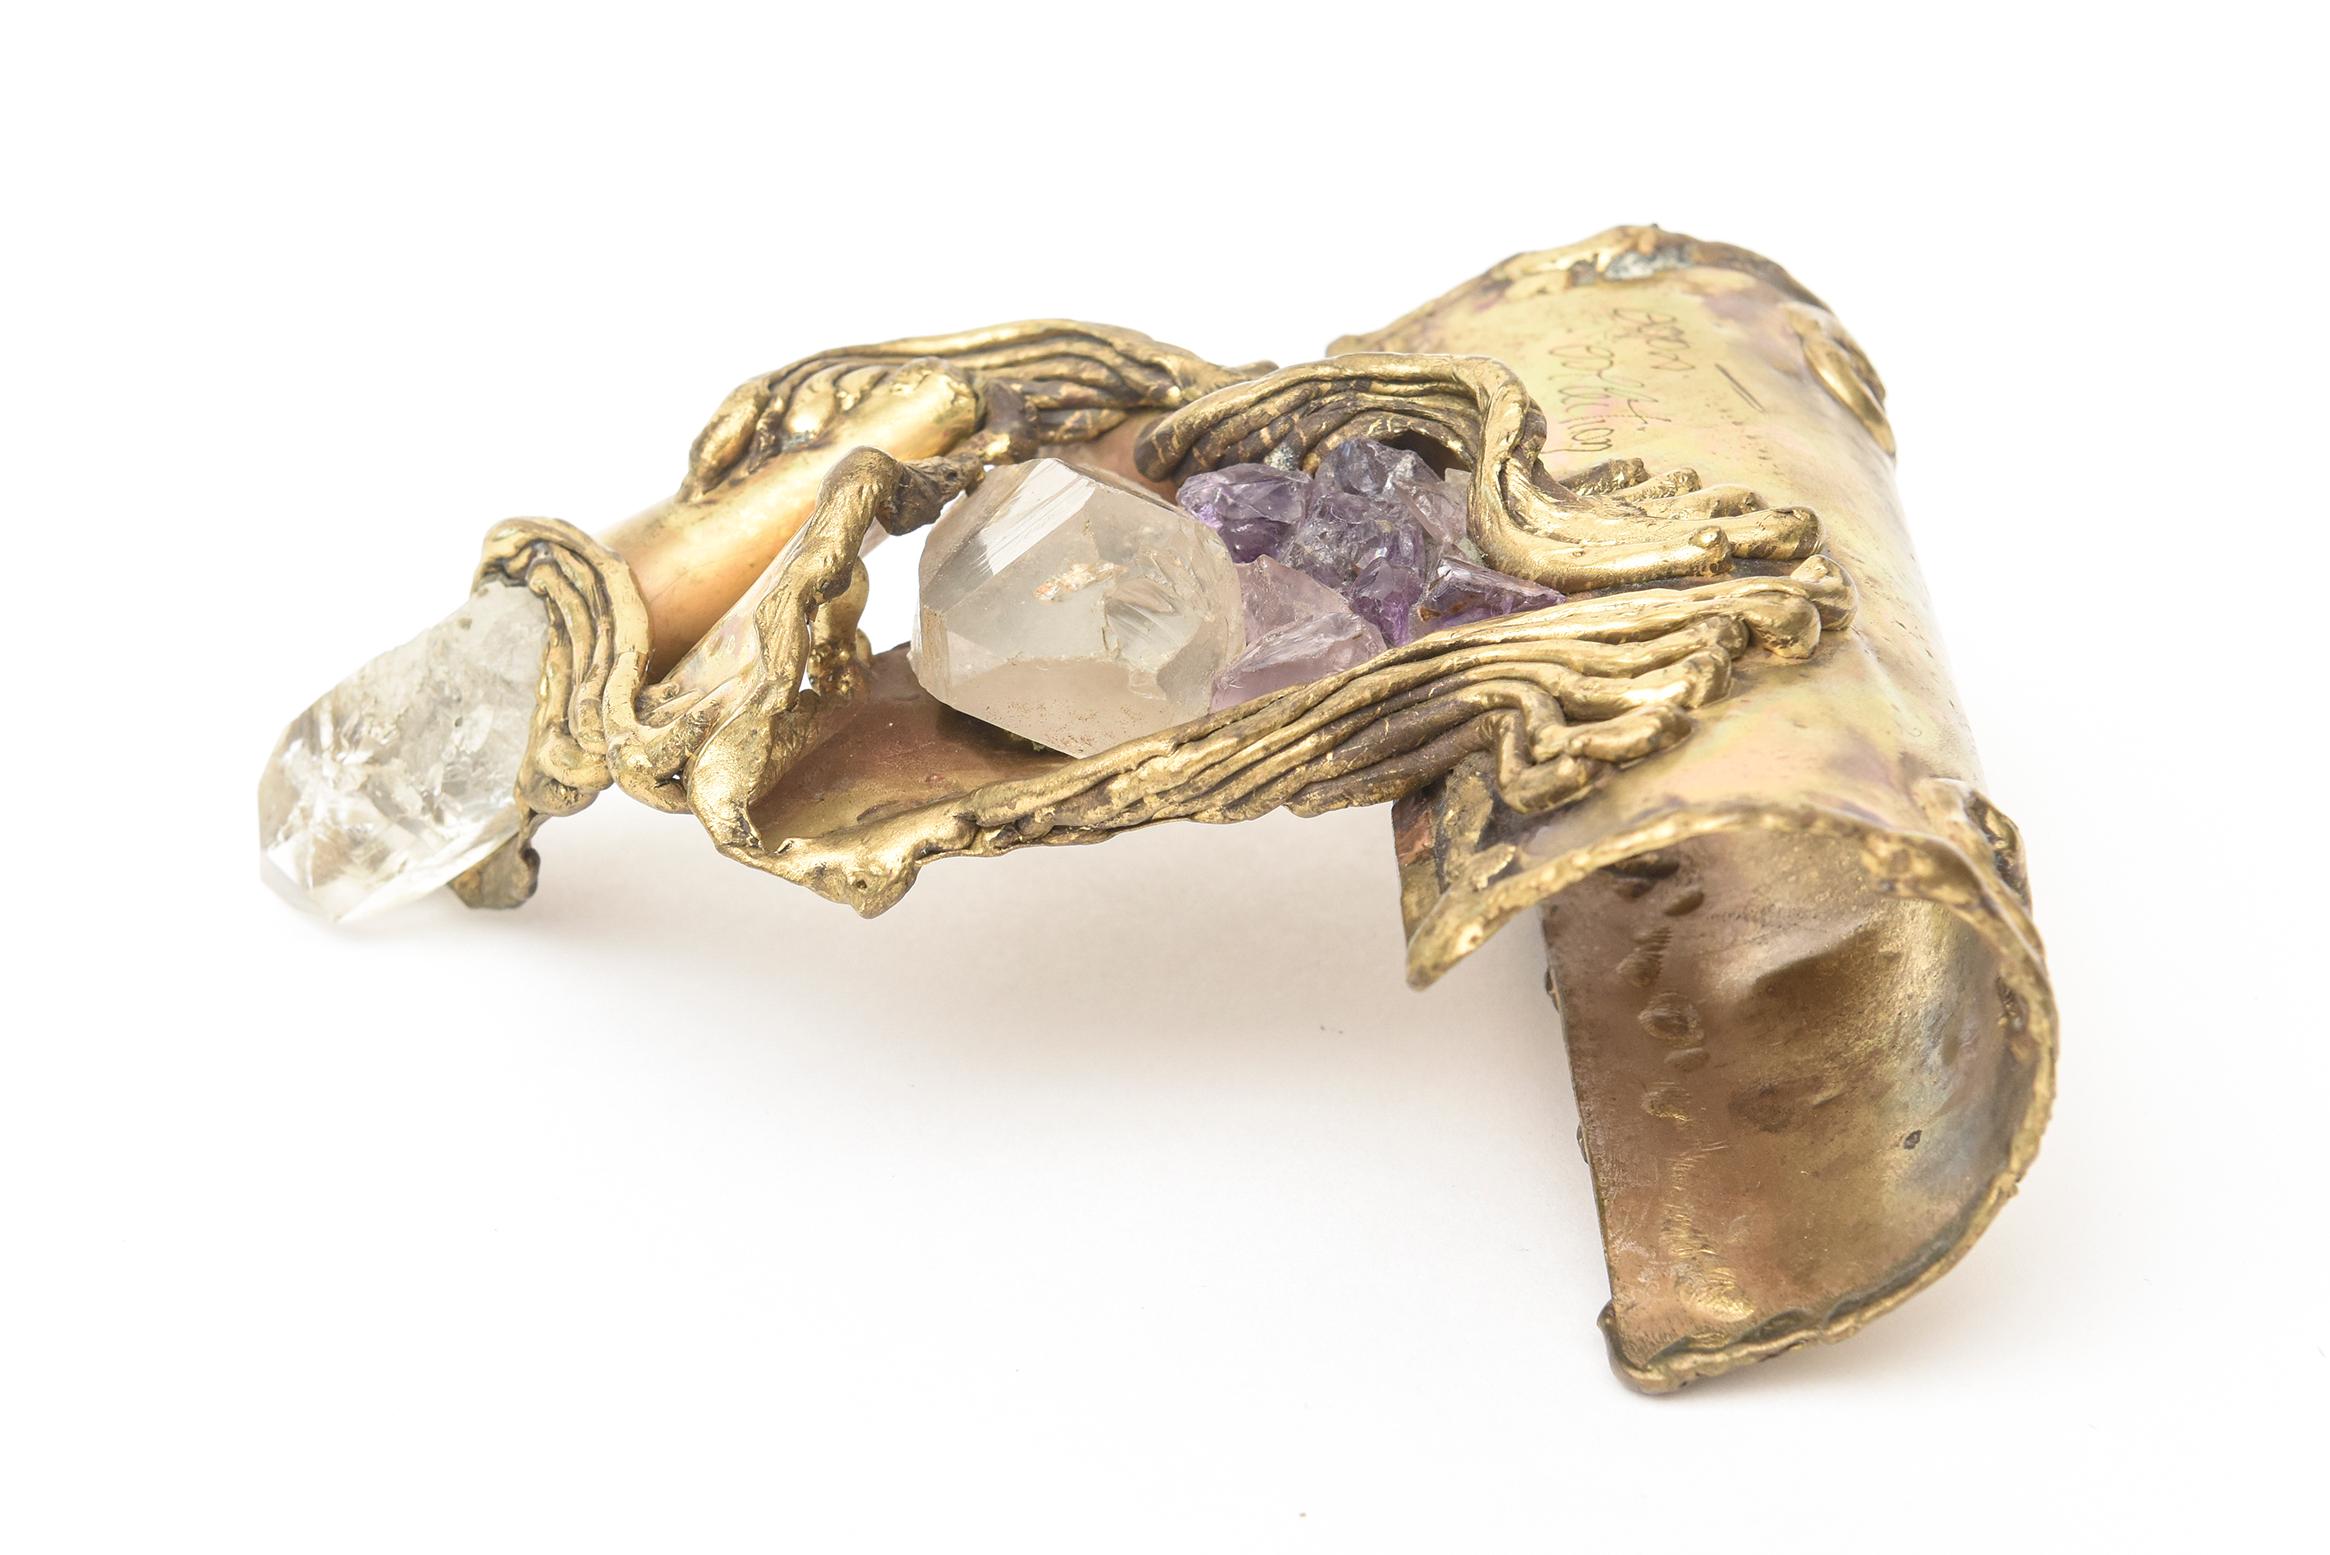 Late 20th Century Brazilian Brass Brutalist Object Sculpture with Amethyst and Quartz Vintage